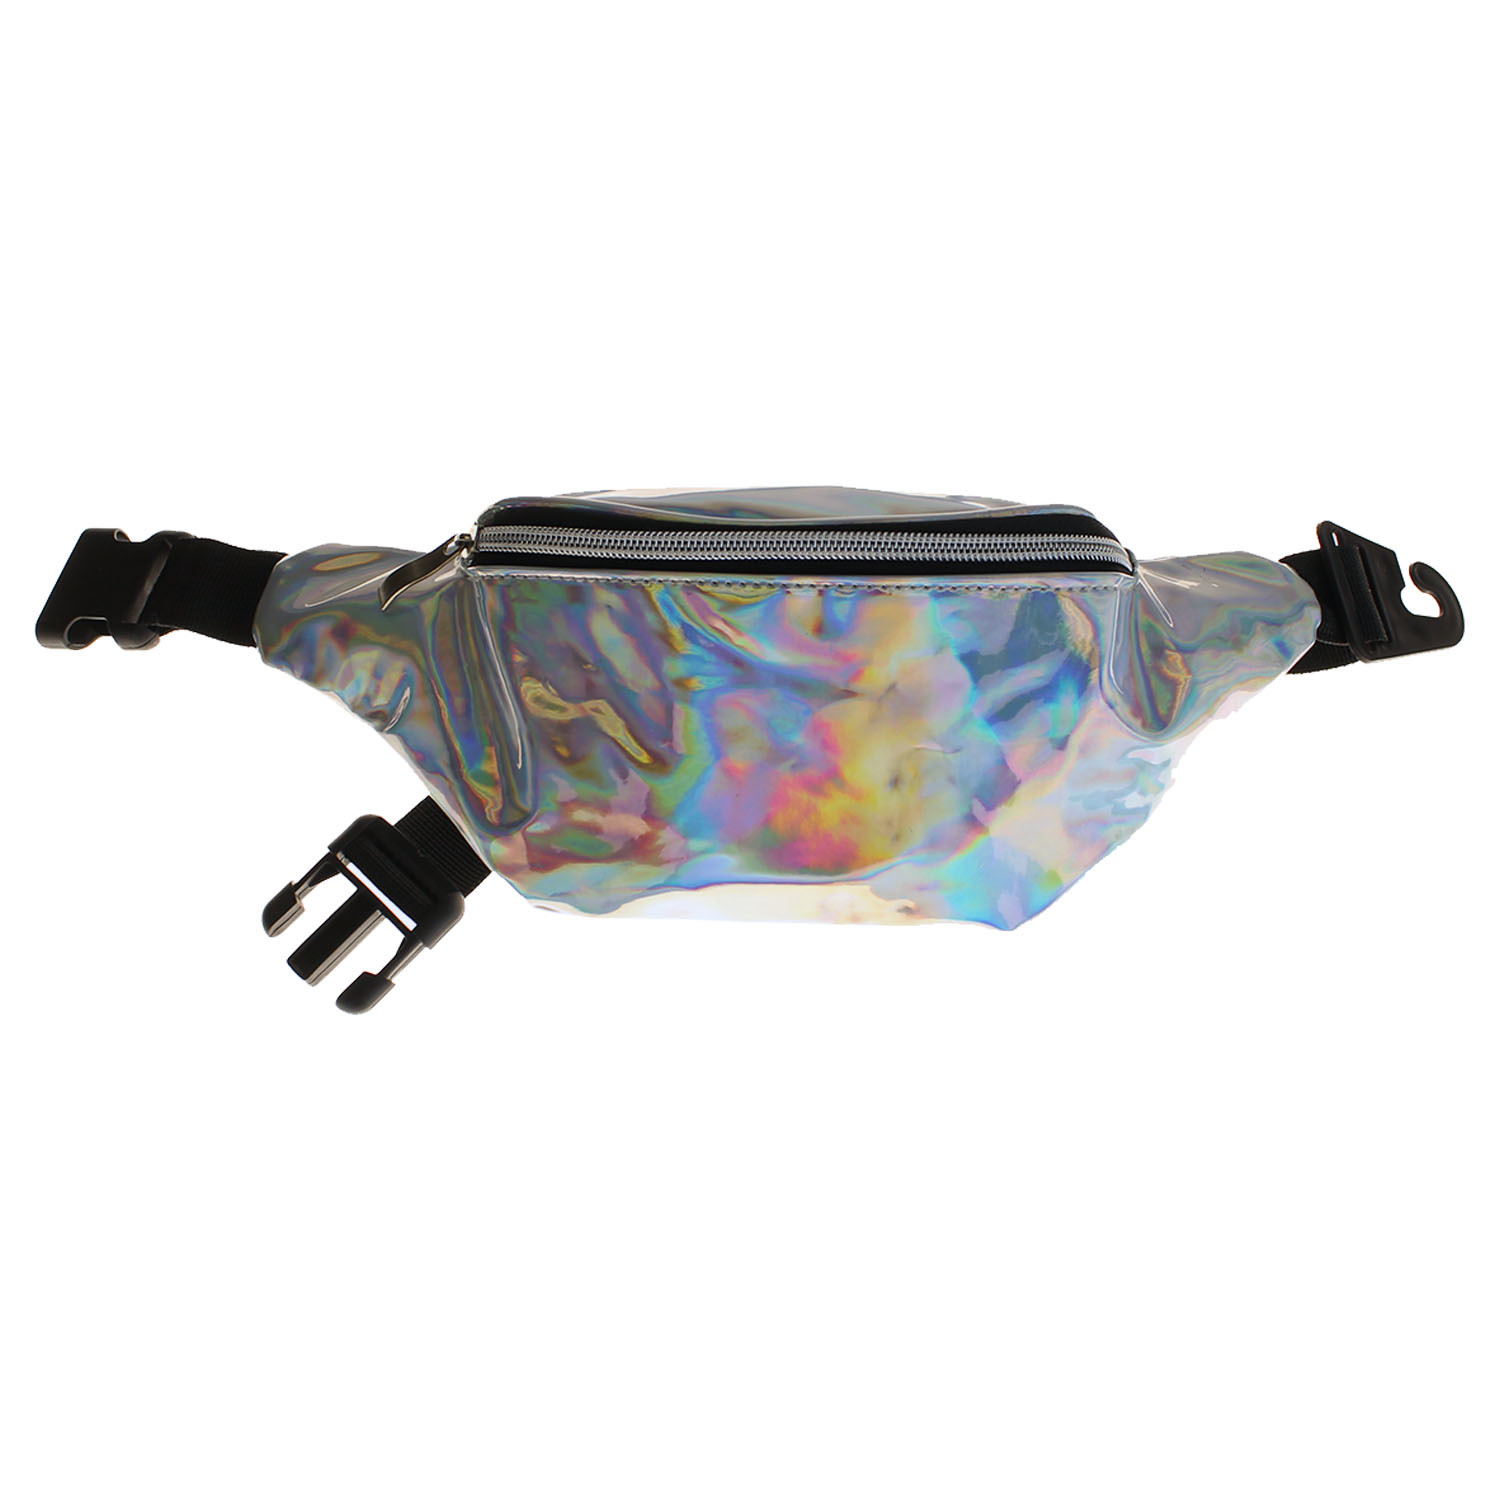 Wholesale Iridescent/Holographic Silver Fanny Pack (SKU 2316663) DollarDays